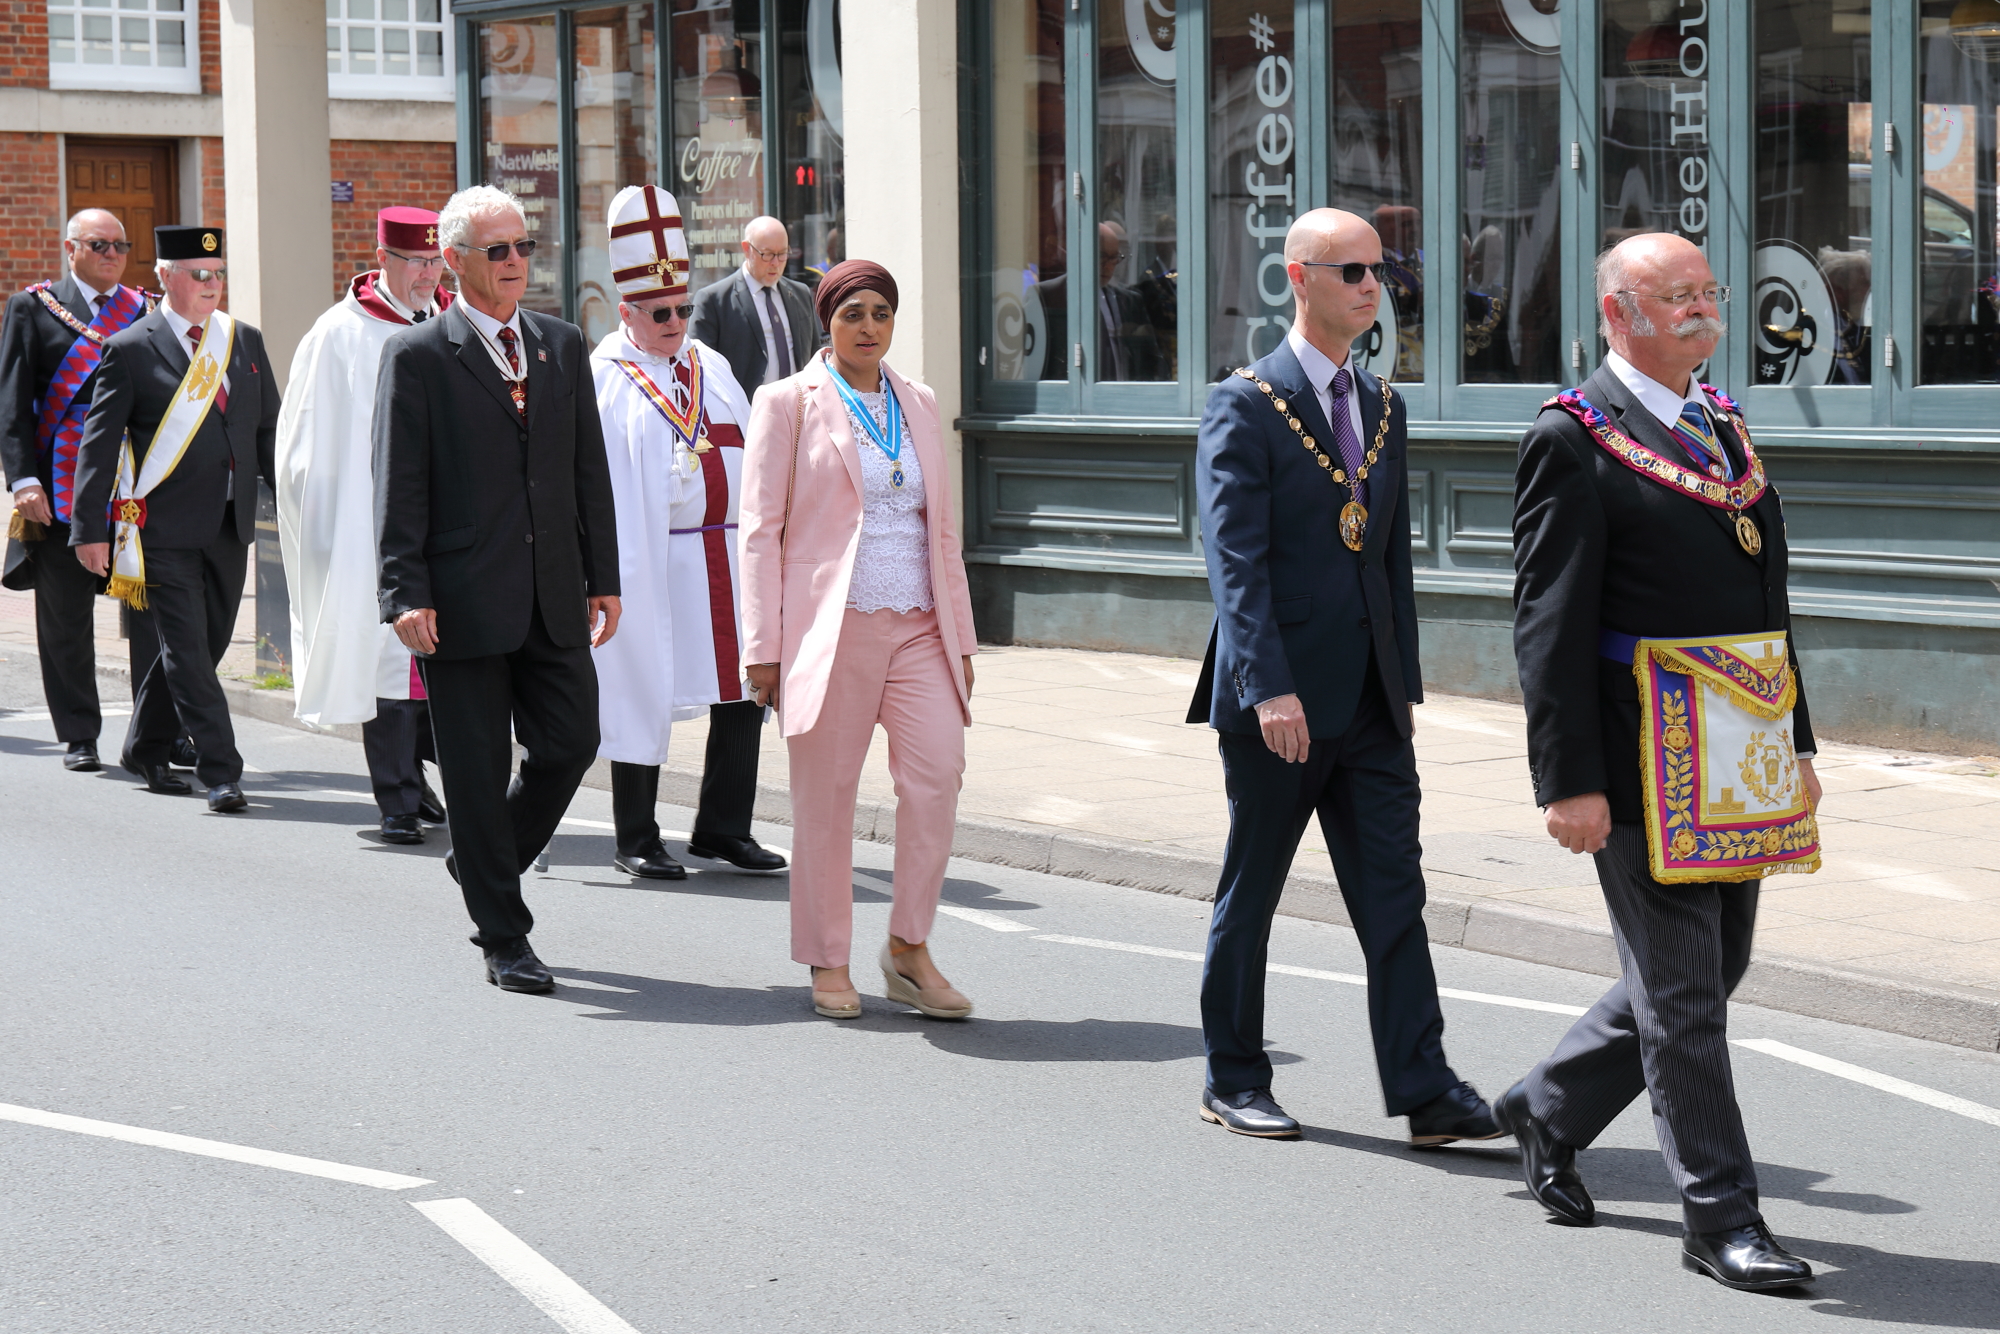 Local community leaders joined Warwickshire Freemasons as they paraded in glorious sunshine along the main high street in Warwick, from the Lodge rooms at Alderson House to the twelfth-century collegiate church of St Mary, for their annual multi-faith service.